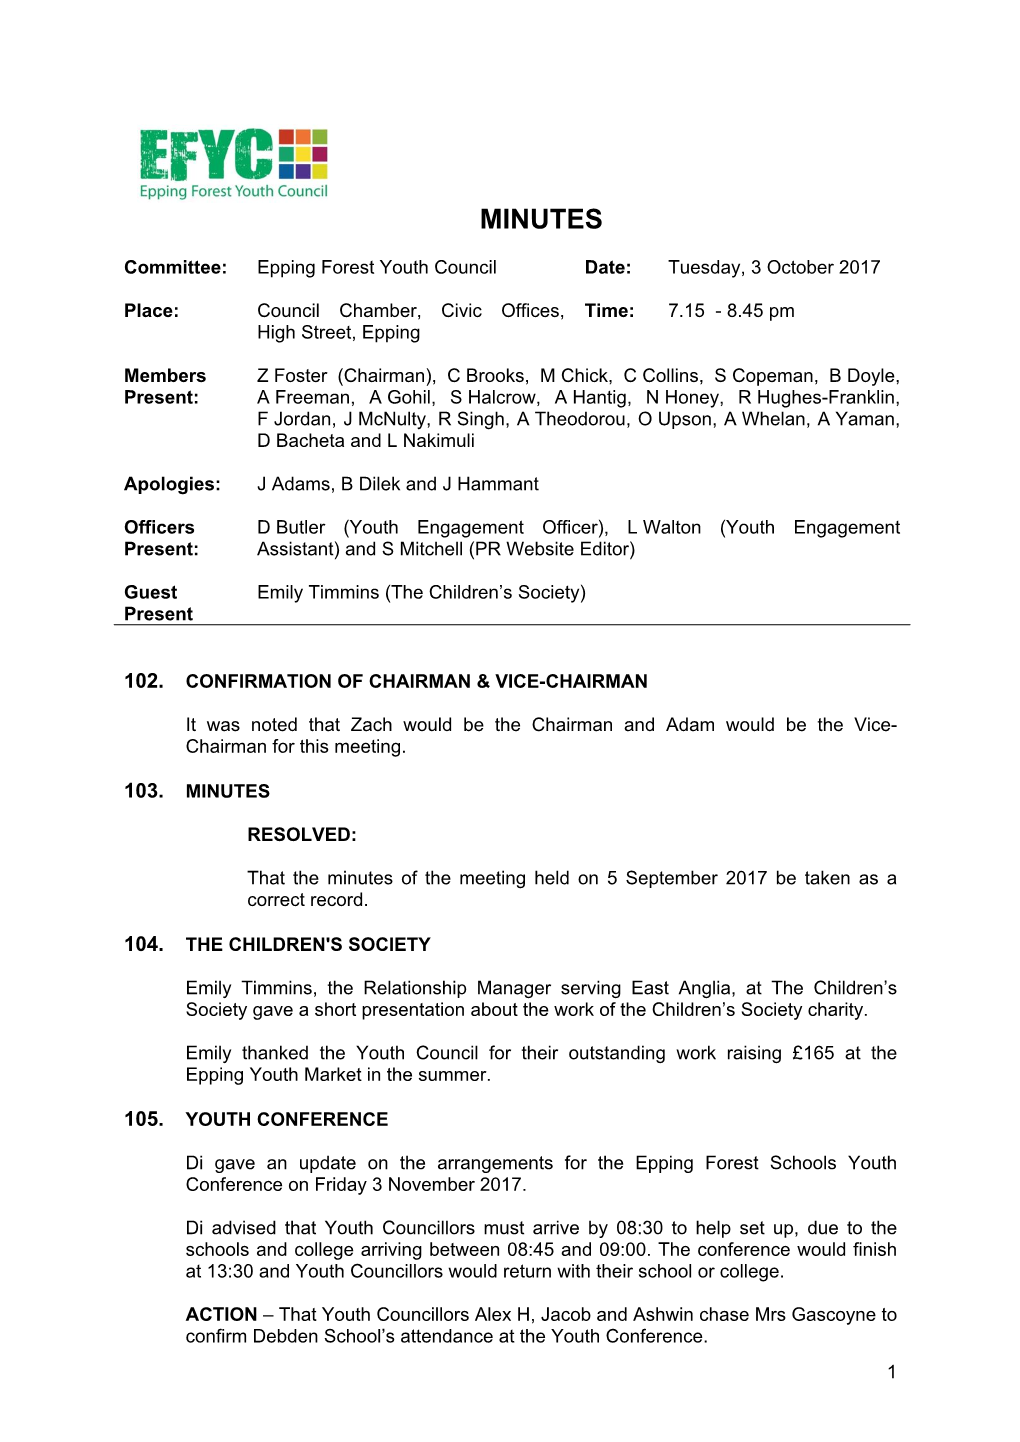 Minutes Document for Epping Forest Youth Council, 03/10/2017 19:15